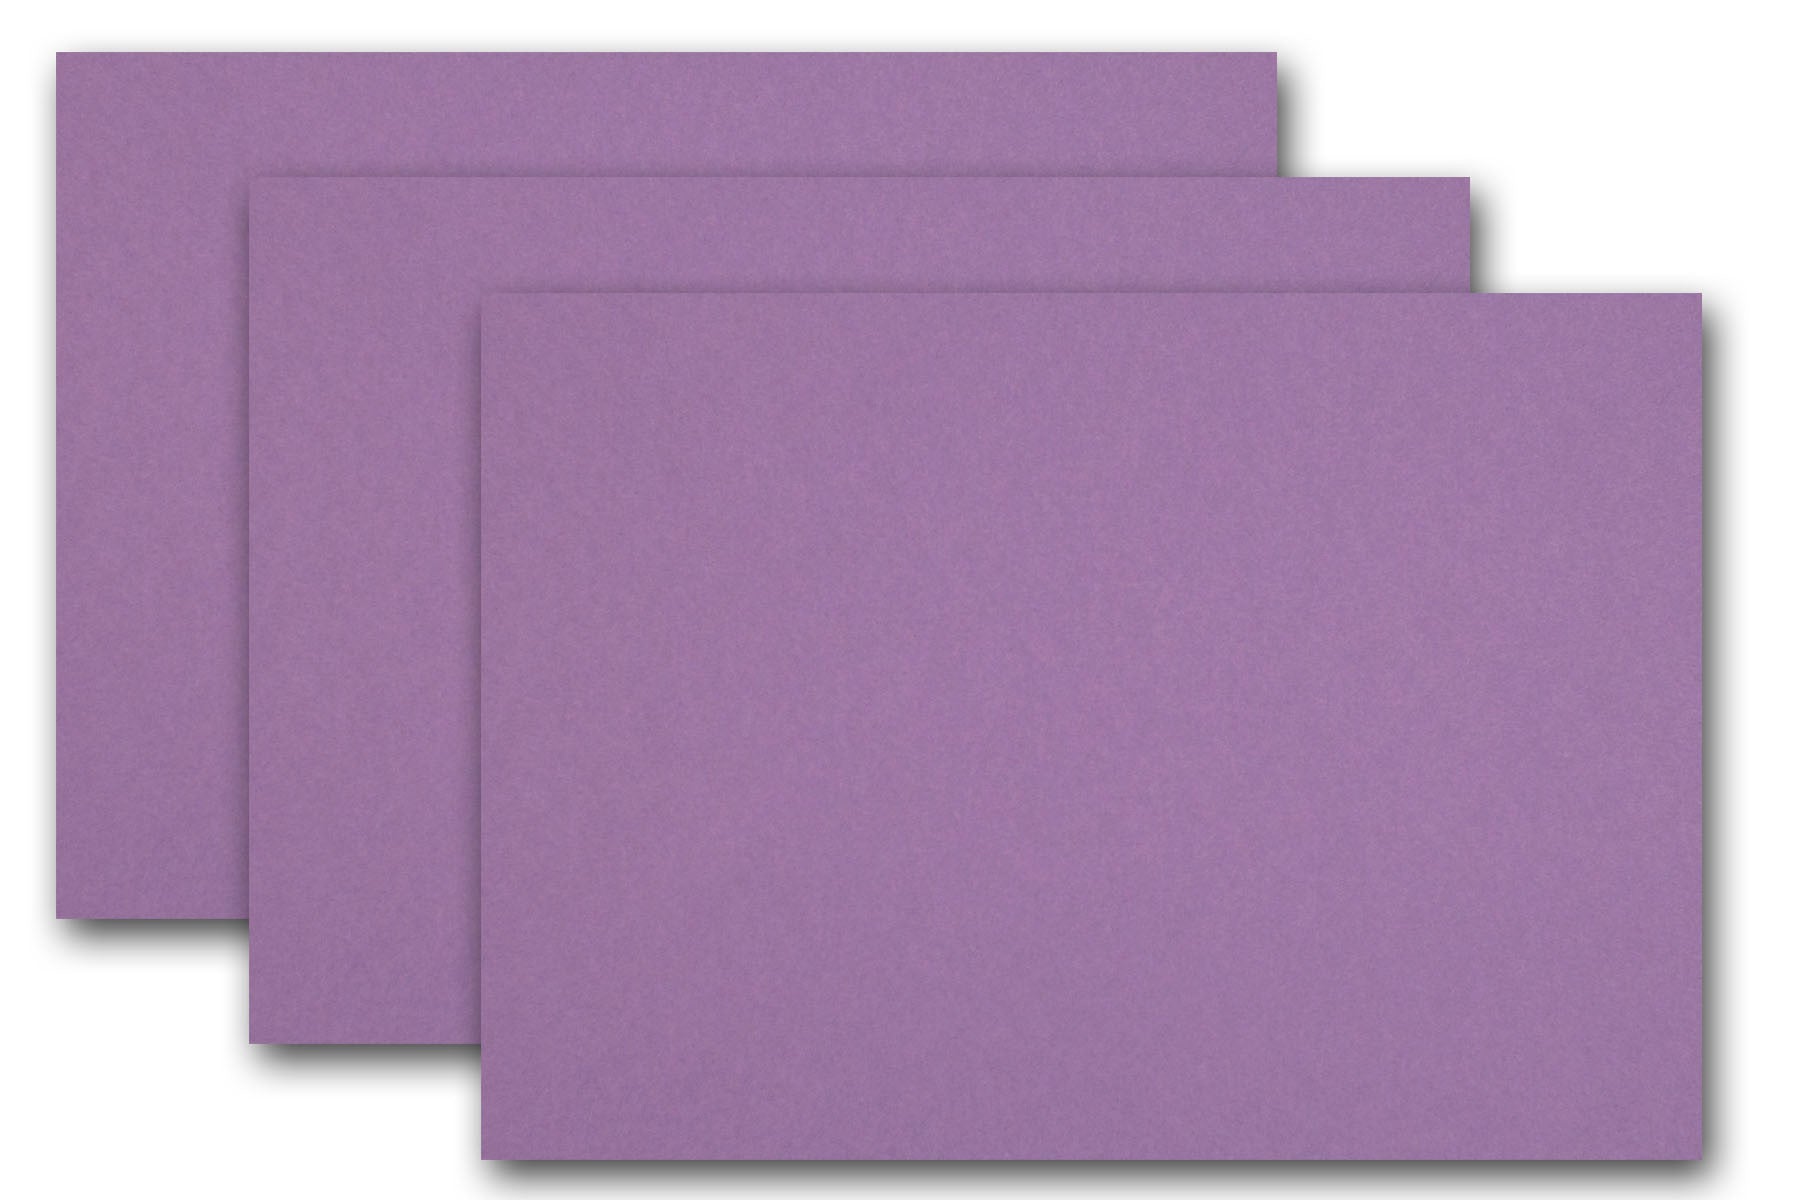 Grape Jelly Cardstock (Pop-Tone, Cover Weight)